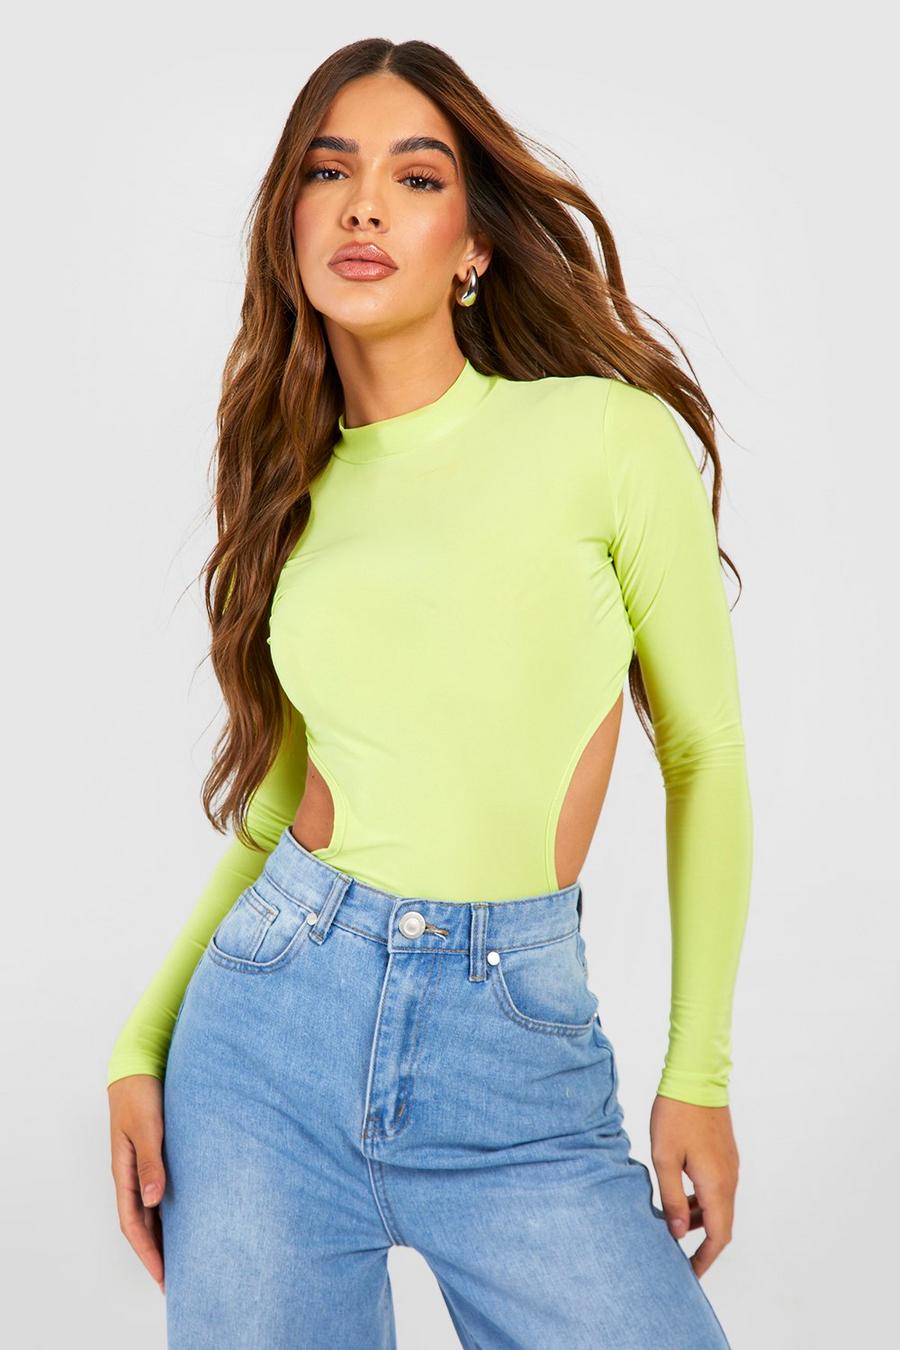 Women lose it over ridiculously high-cut 'front wedgie' bodysuit from Boohoo .com